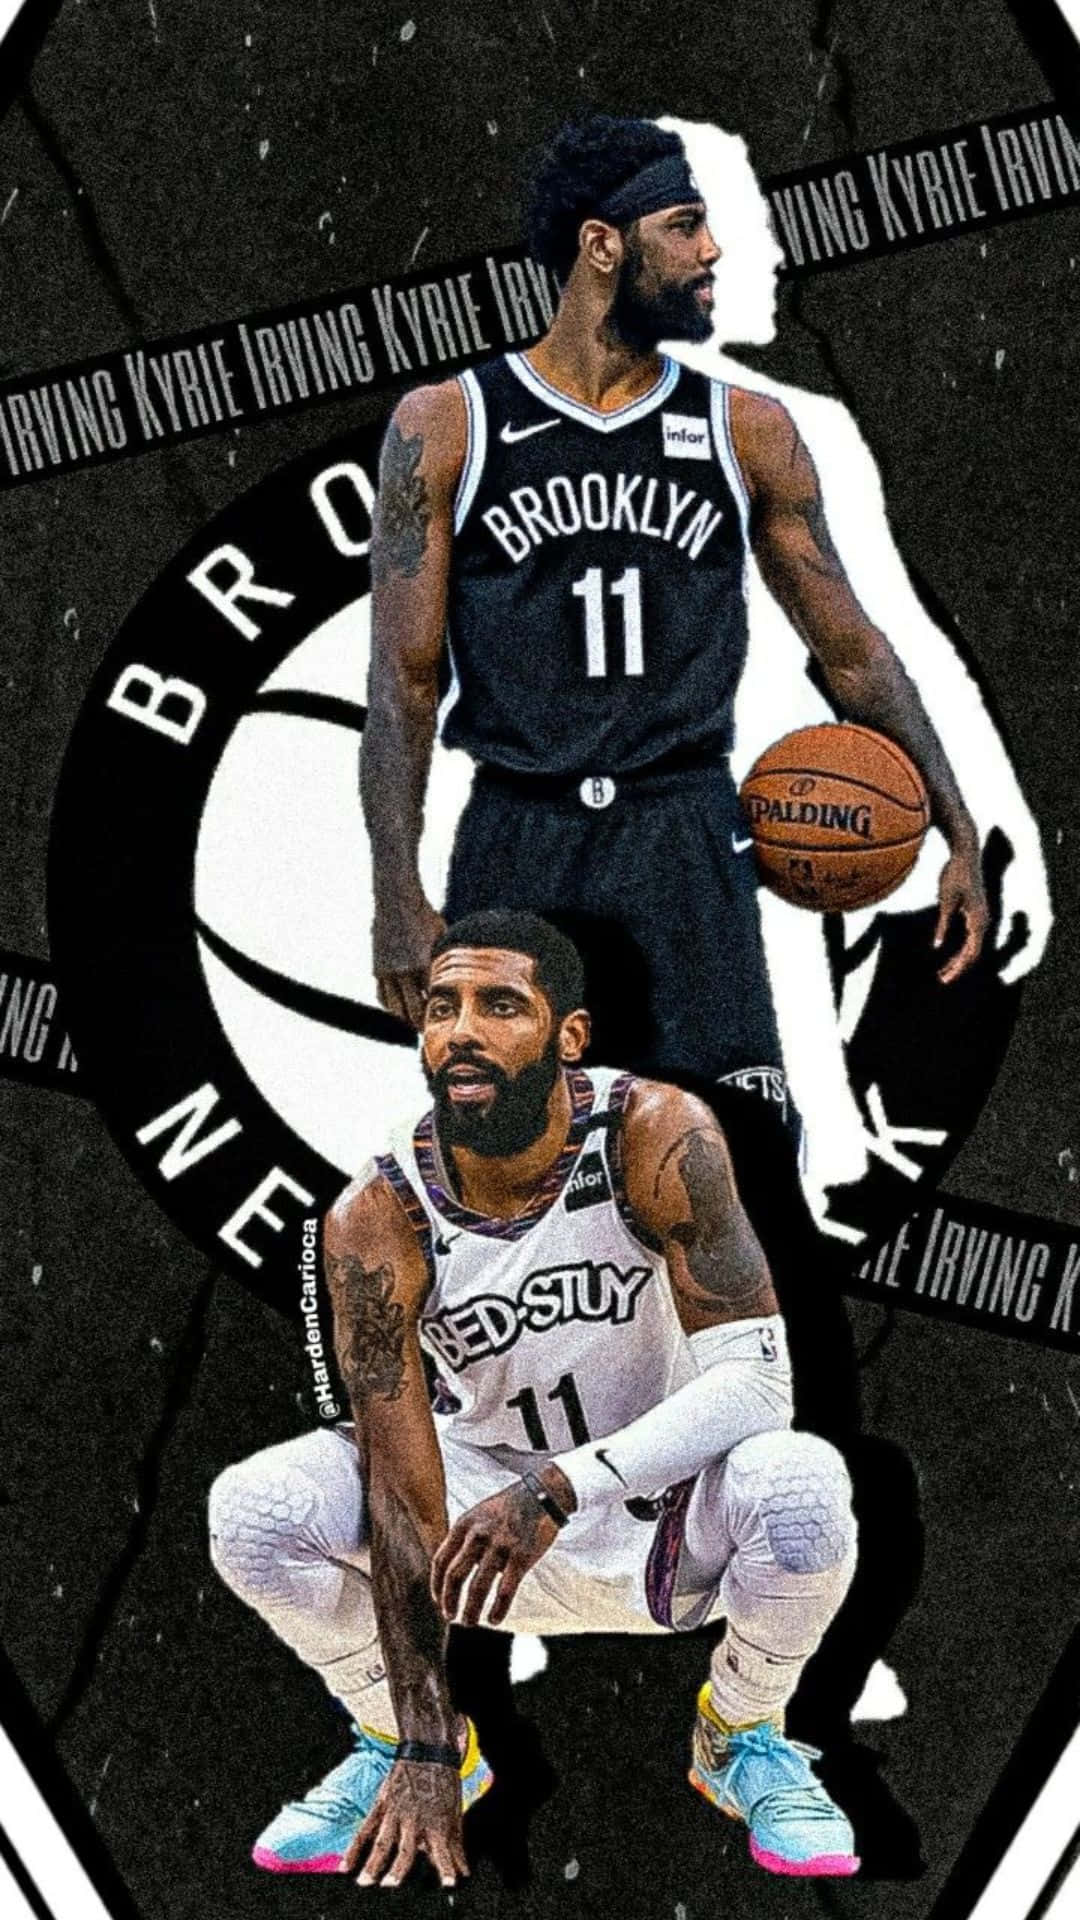 "Your team is here. Welcome to Brooklyn!"